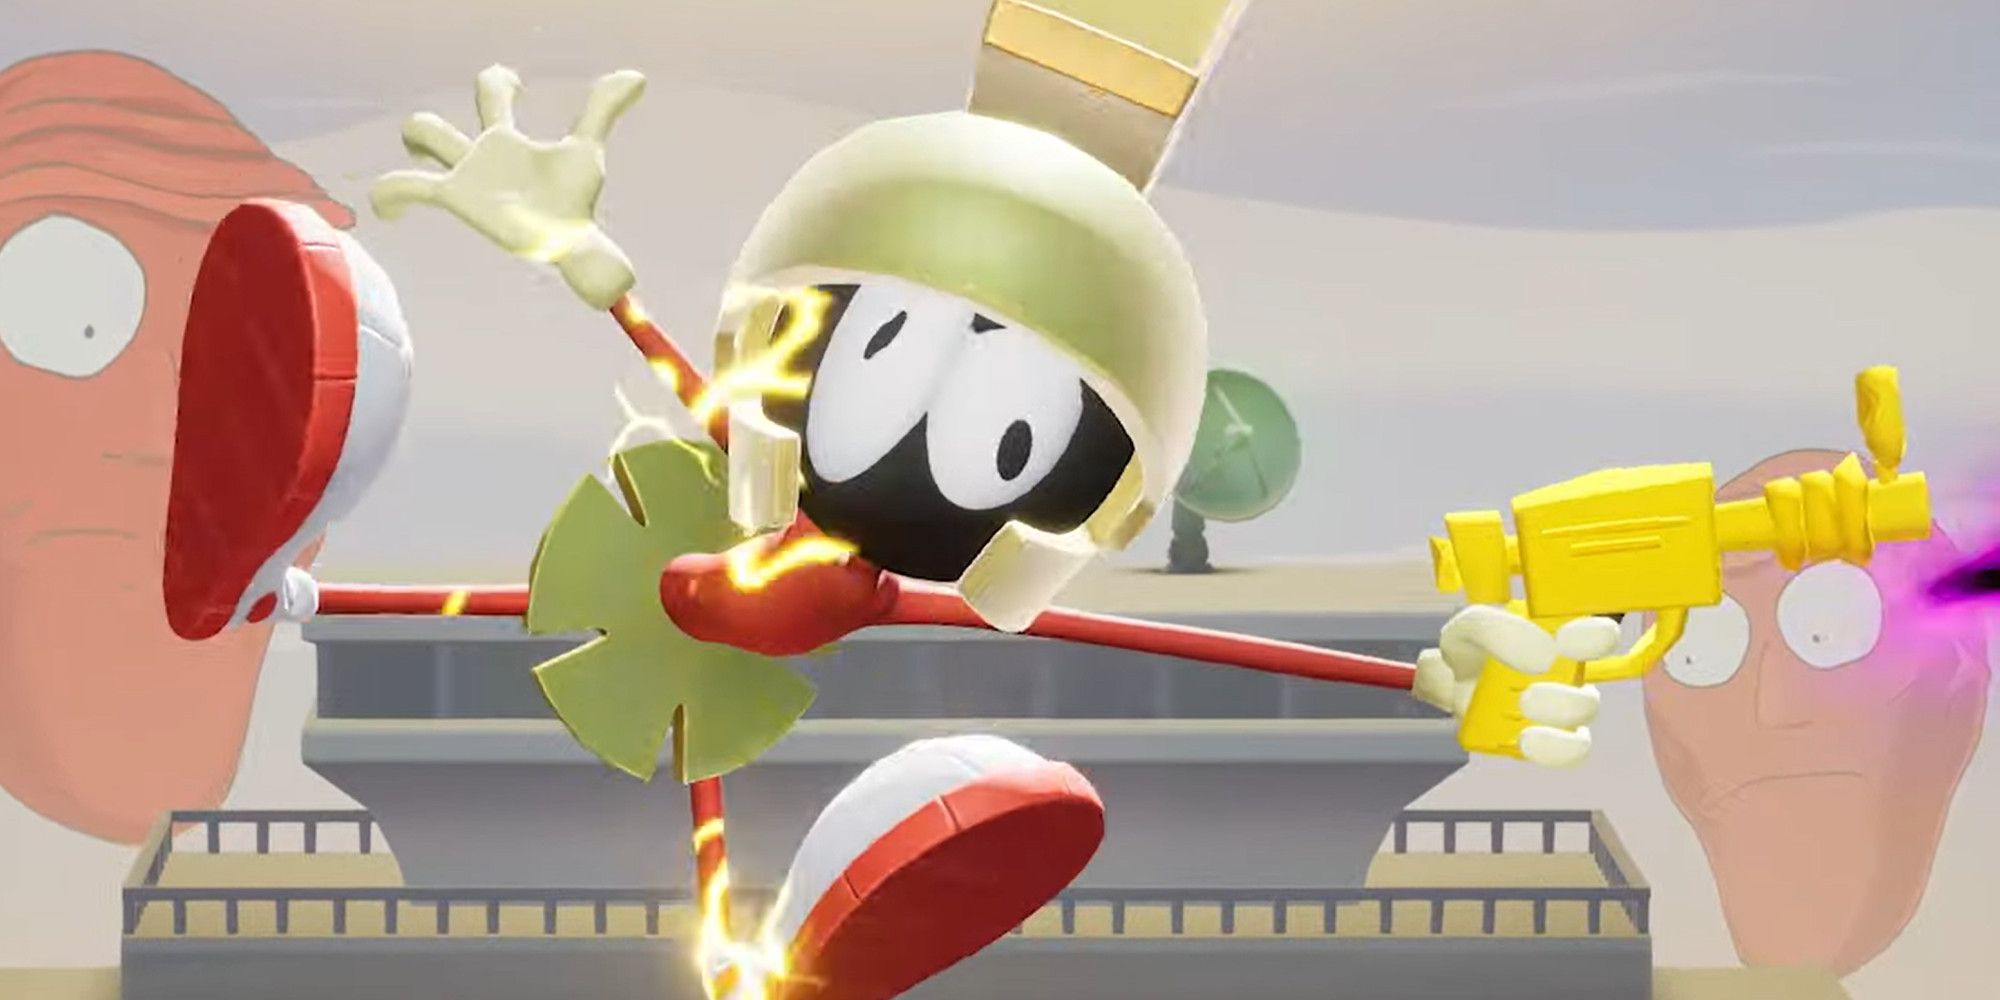 Marvin the Martian shocking himself while firing his gun in MultiVersus